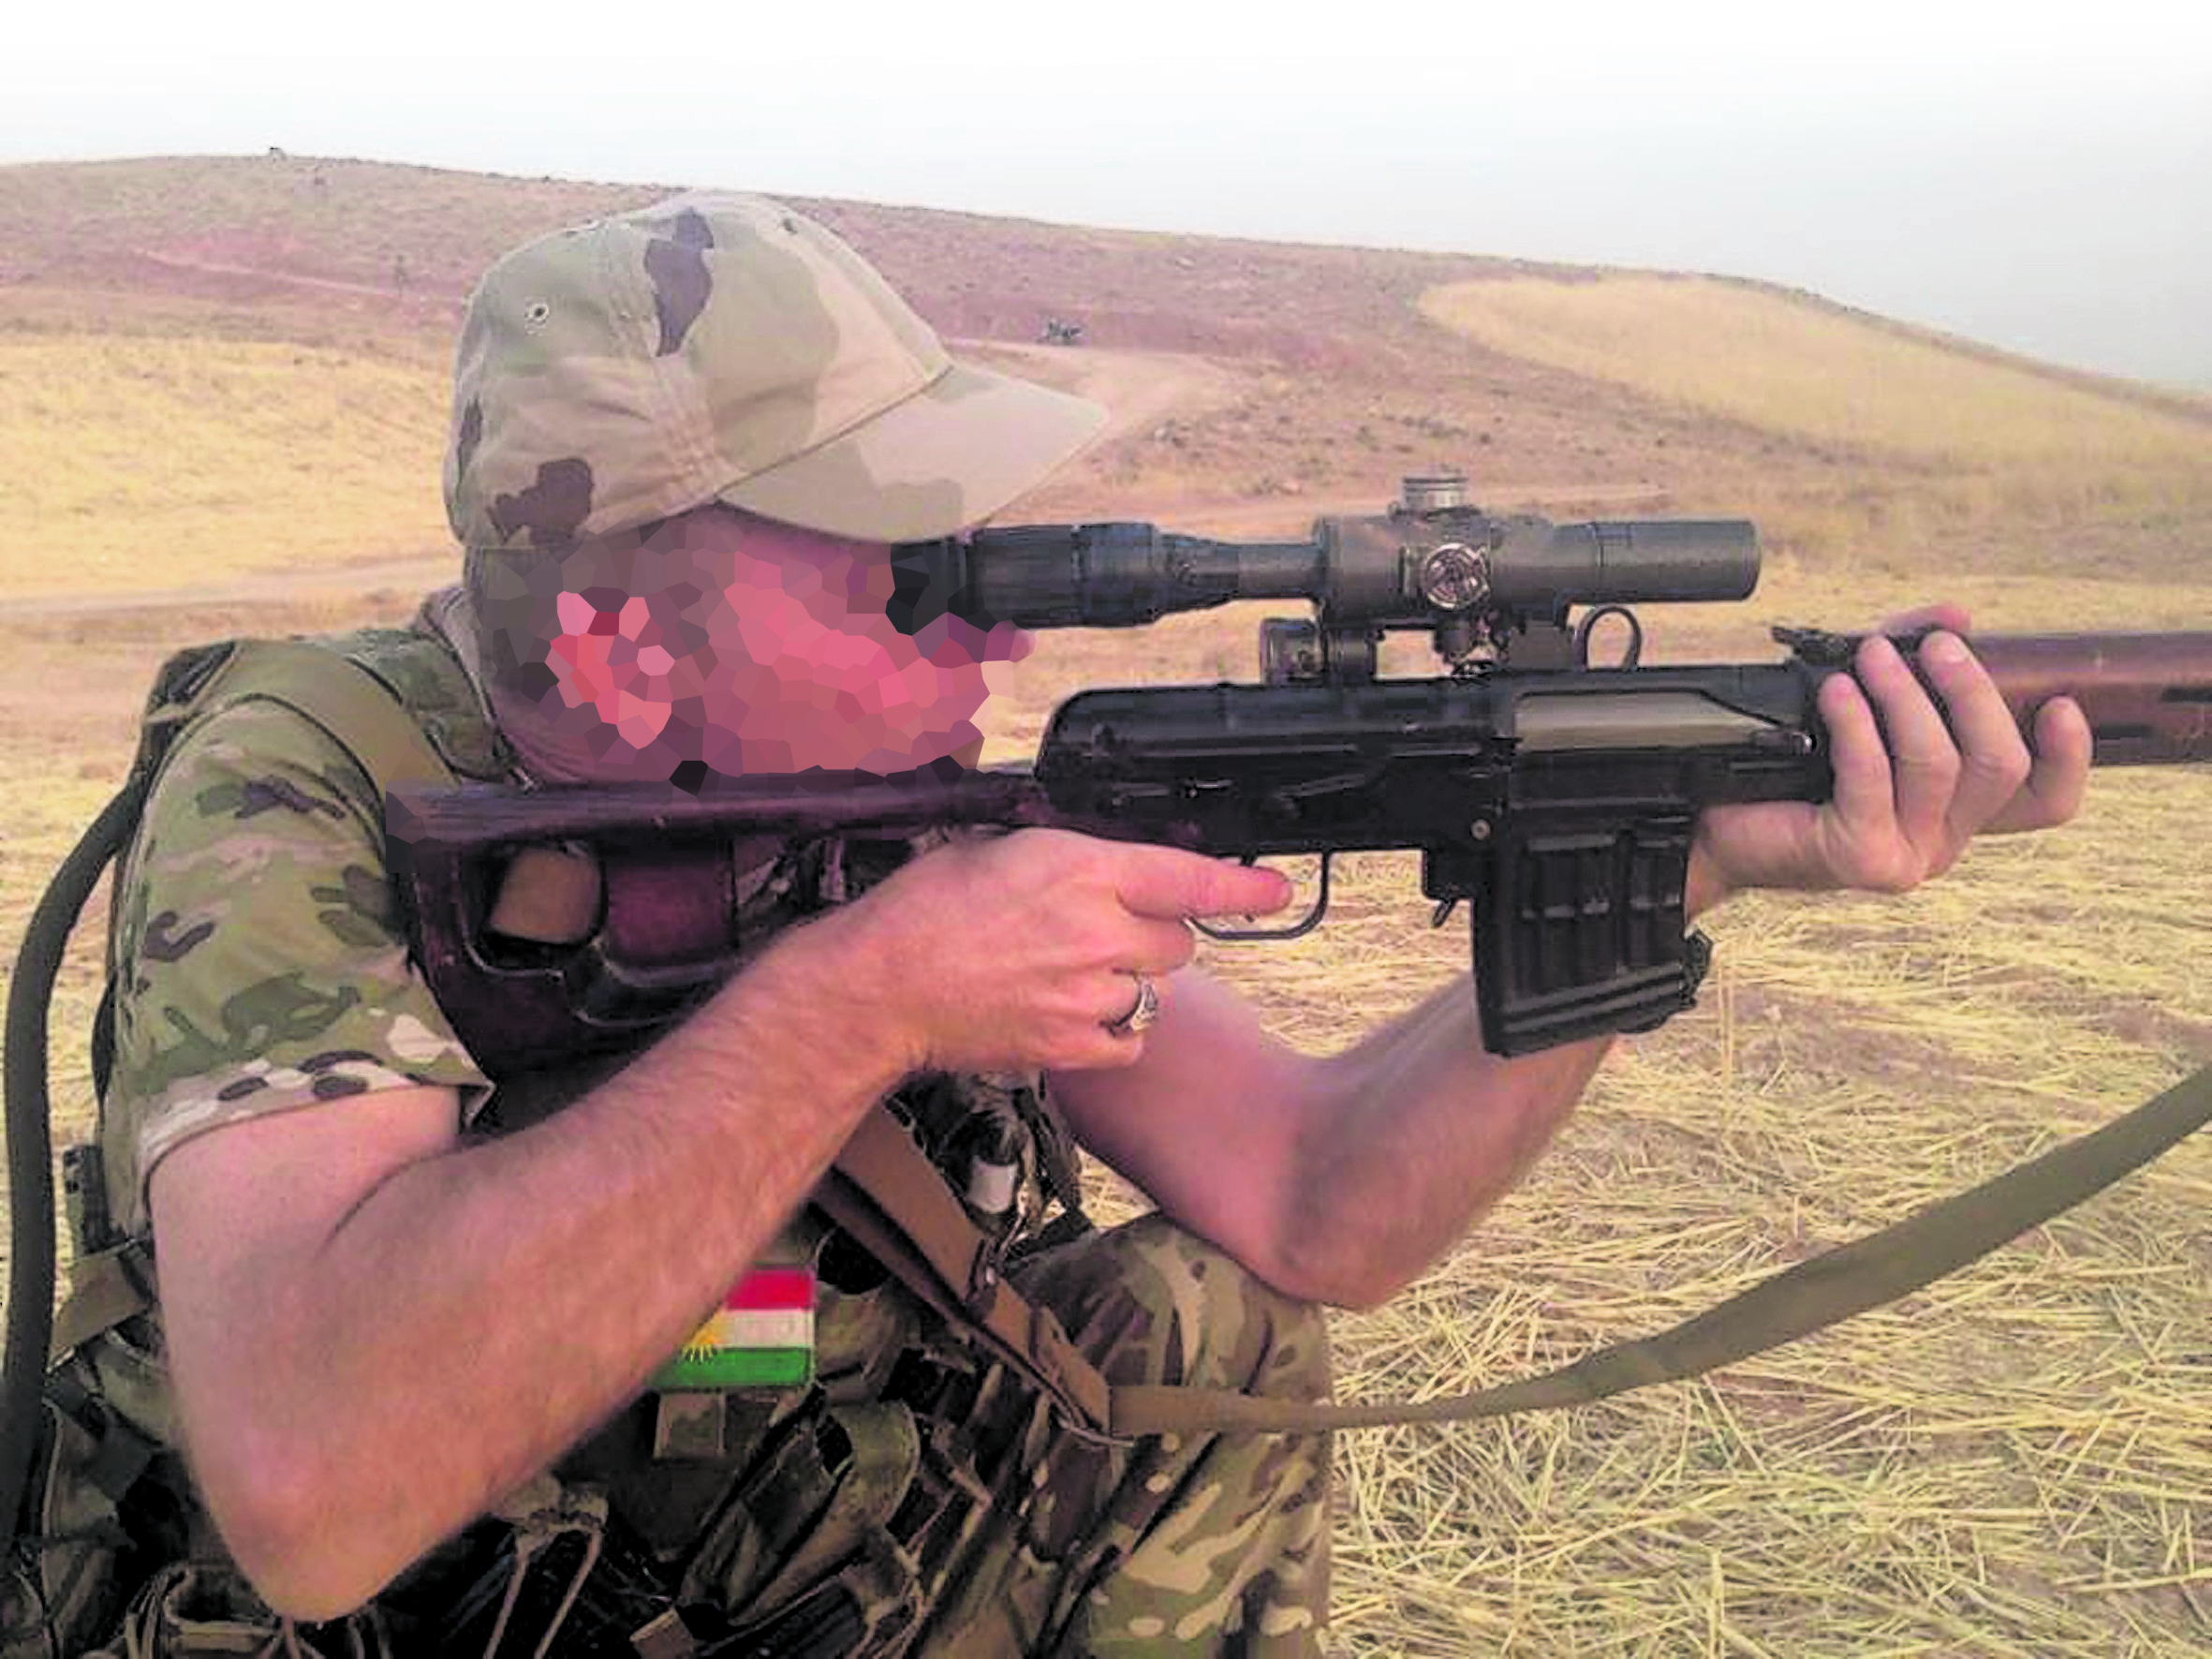 Alan Duncan left Scotland and went to join the Peshmerga in Kurdistan as he thought it was the right thing to do.